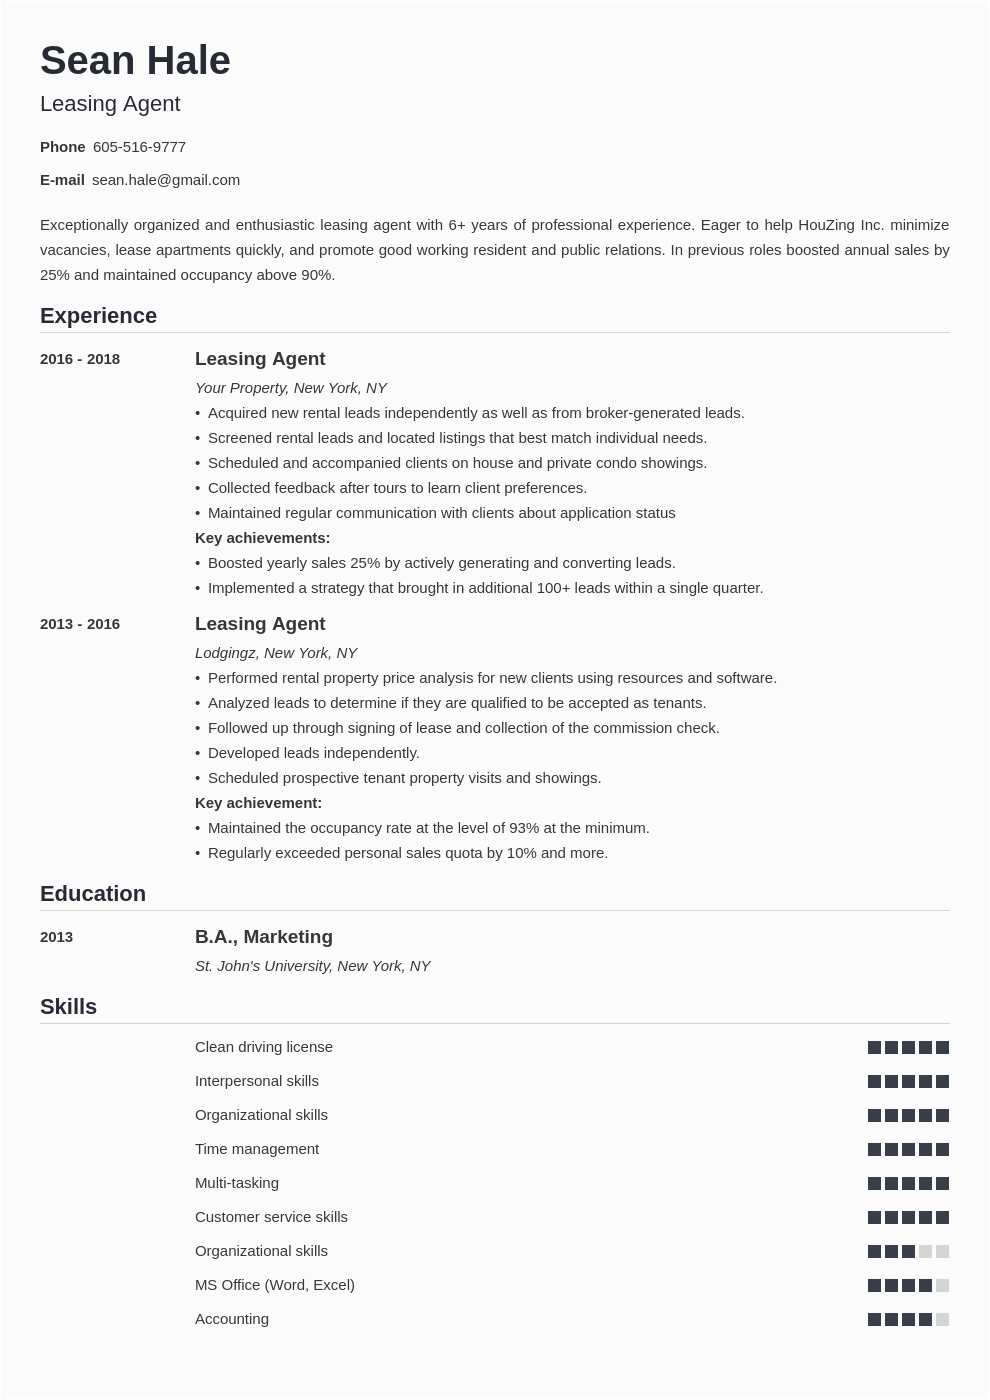 Entry Level Leasing Consultant Resume Sample Leasing Agent Resume Sample & Writing Guide [20 Tips]